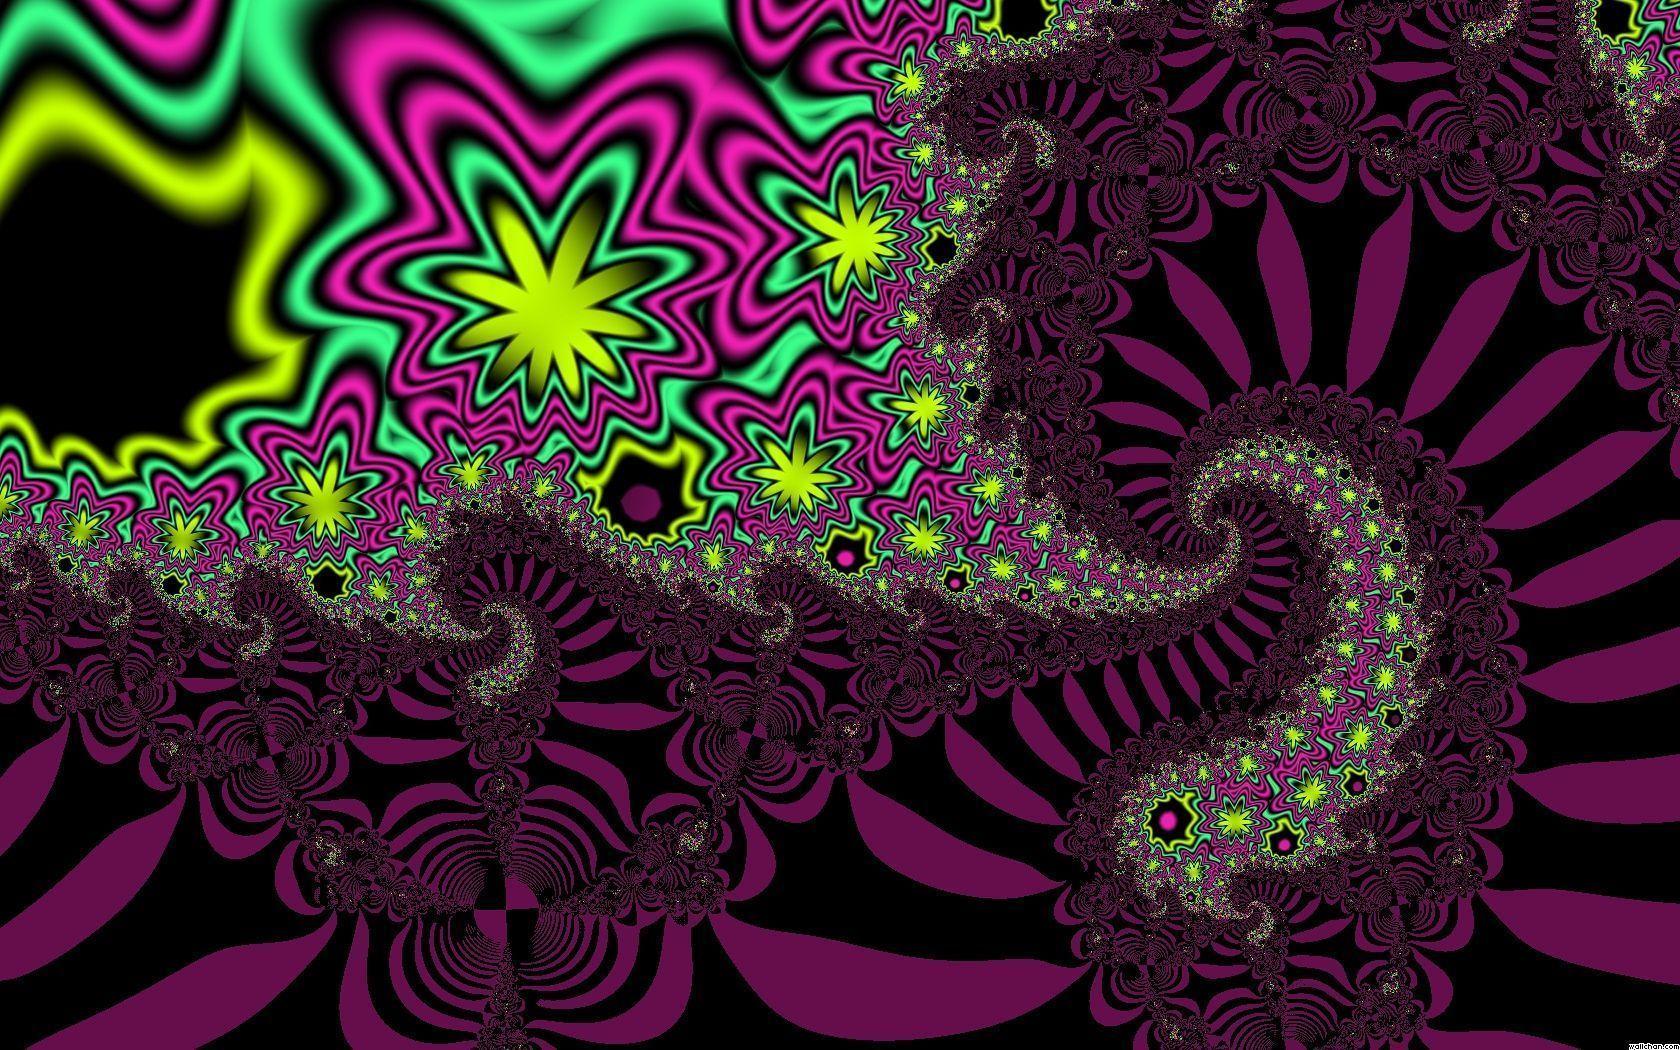 25 Amazing Trippy Wallpaper Backgrounds.